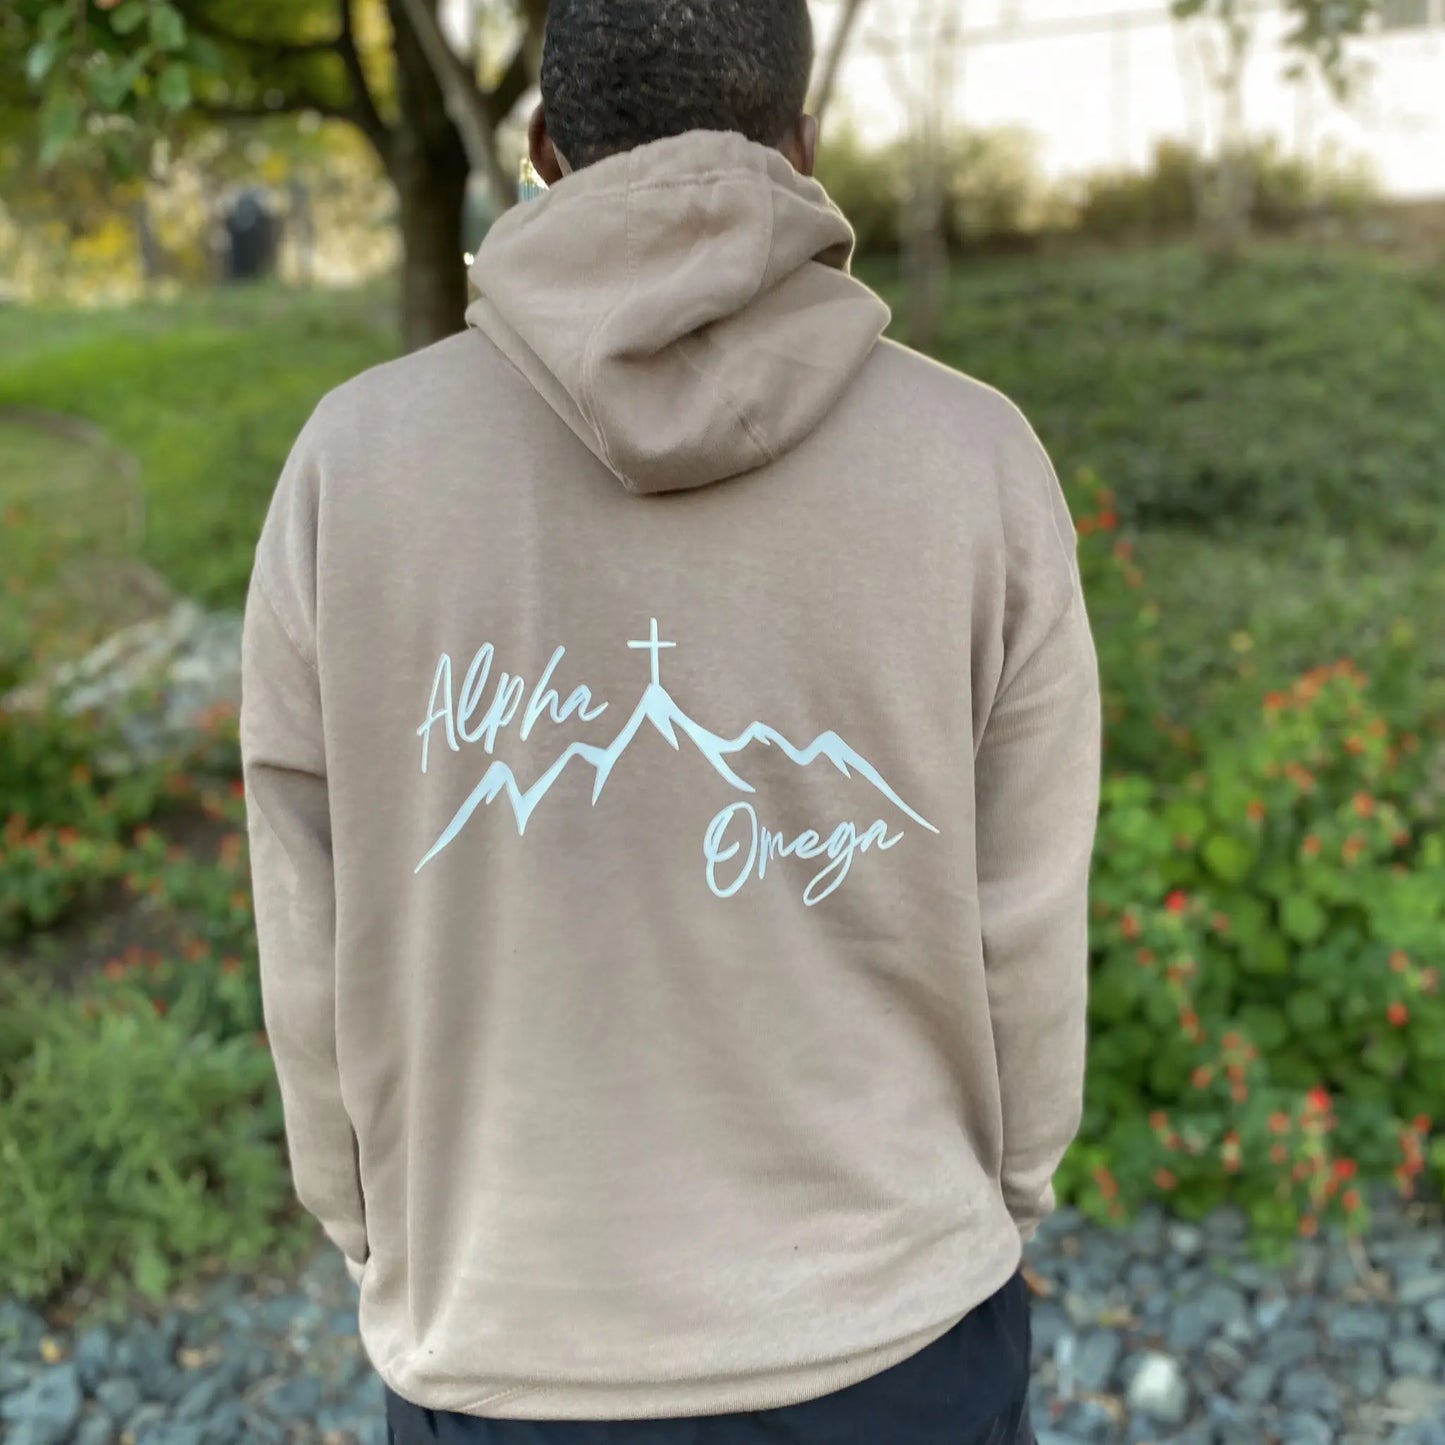 Alpha and Omega Tan  Hoodie. Alpha and Omega written in bold white letters on the front of the Tan Heavyweight hoodie. Tan Hoodie, christian clothing, faith based apparel Righteous sweatshirt. Jesus inspired clothing. Oversized sweatshirt. loungewear. streetwear. Christian streetwear. Christian clothing brand alpha and omega 